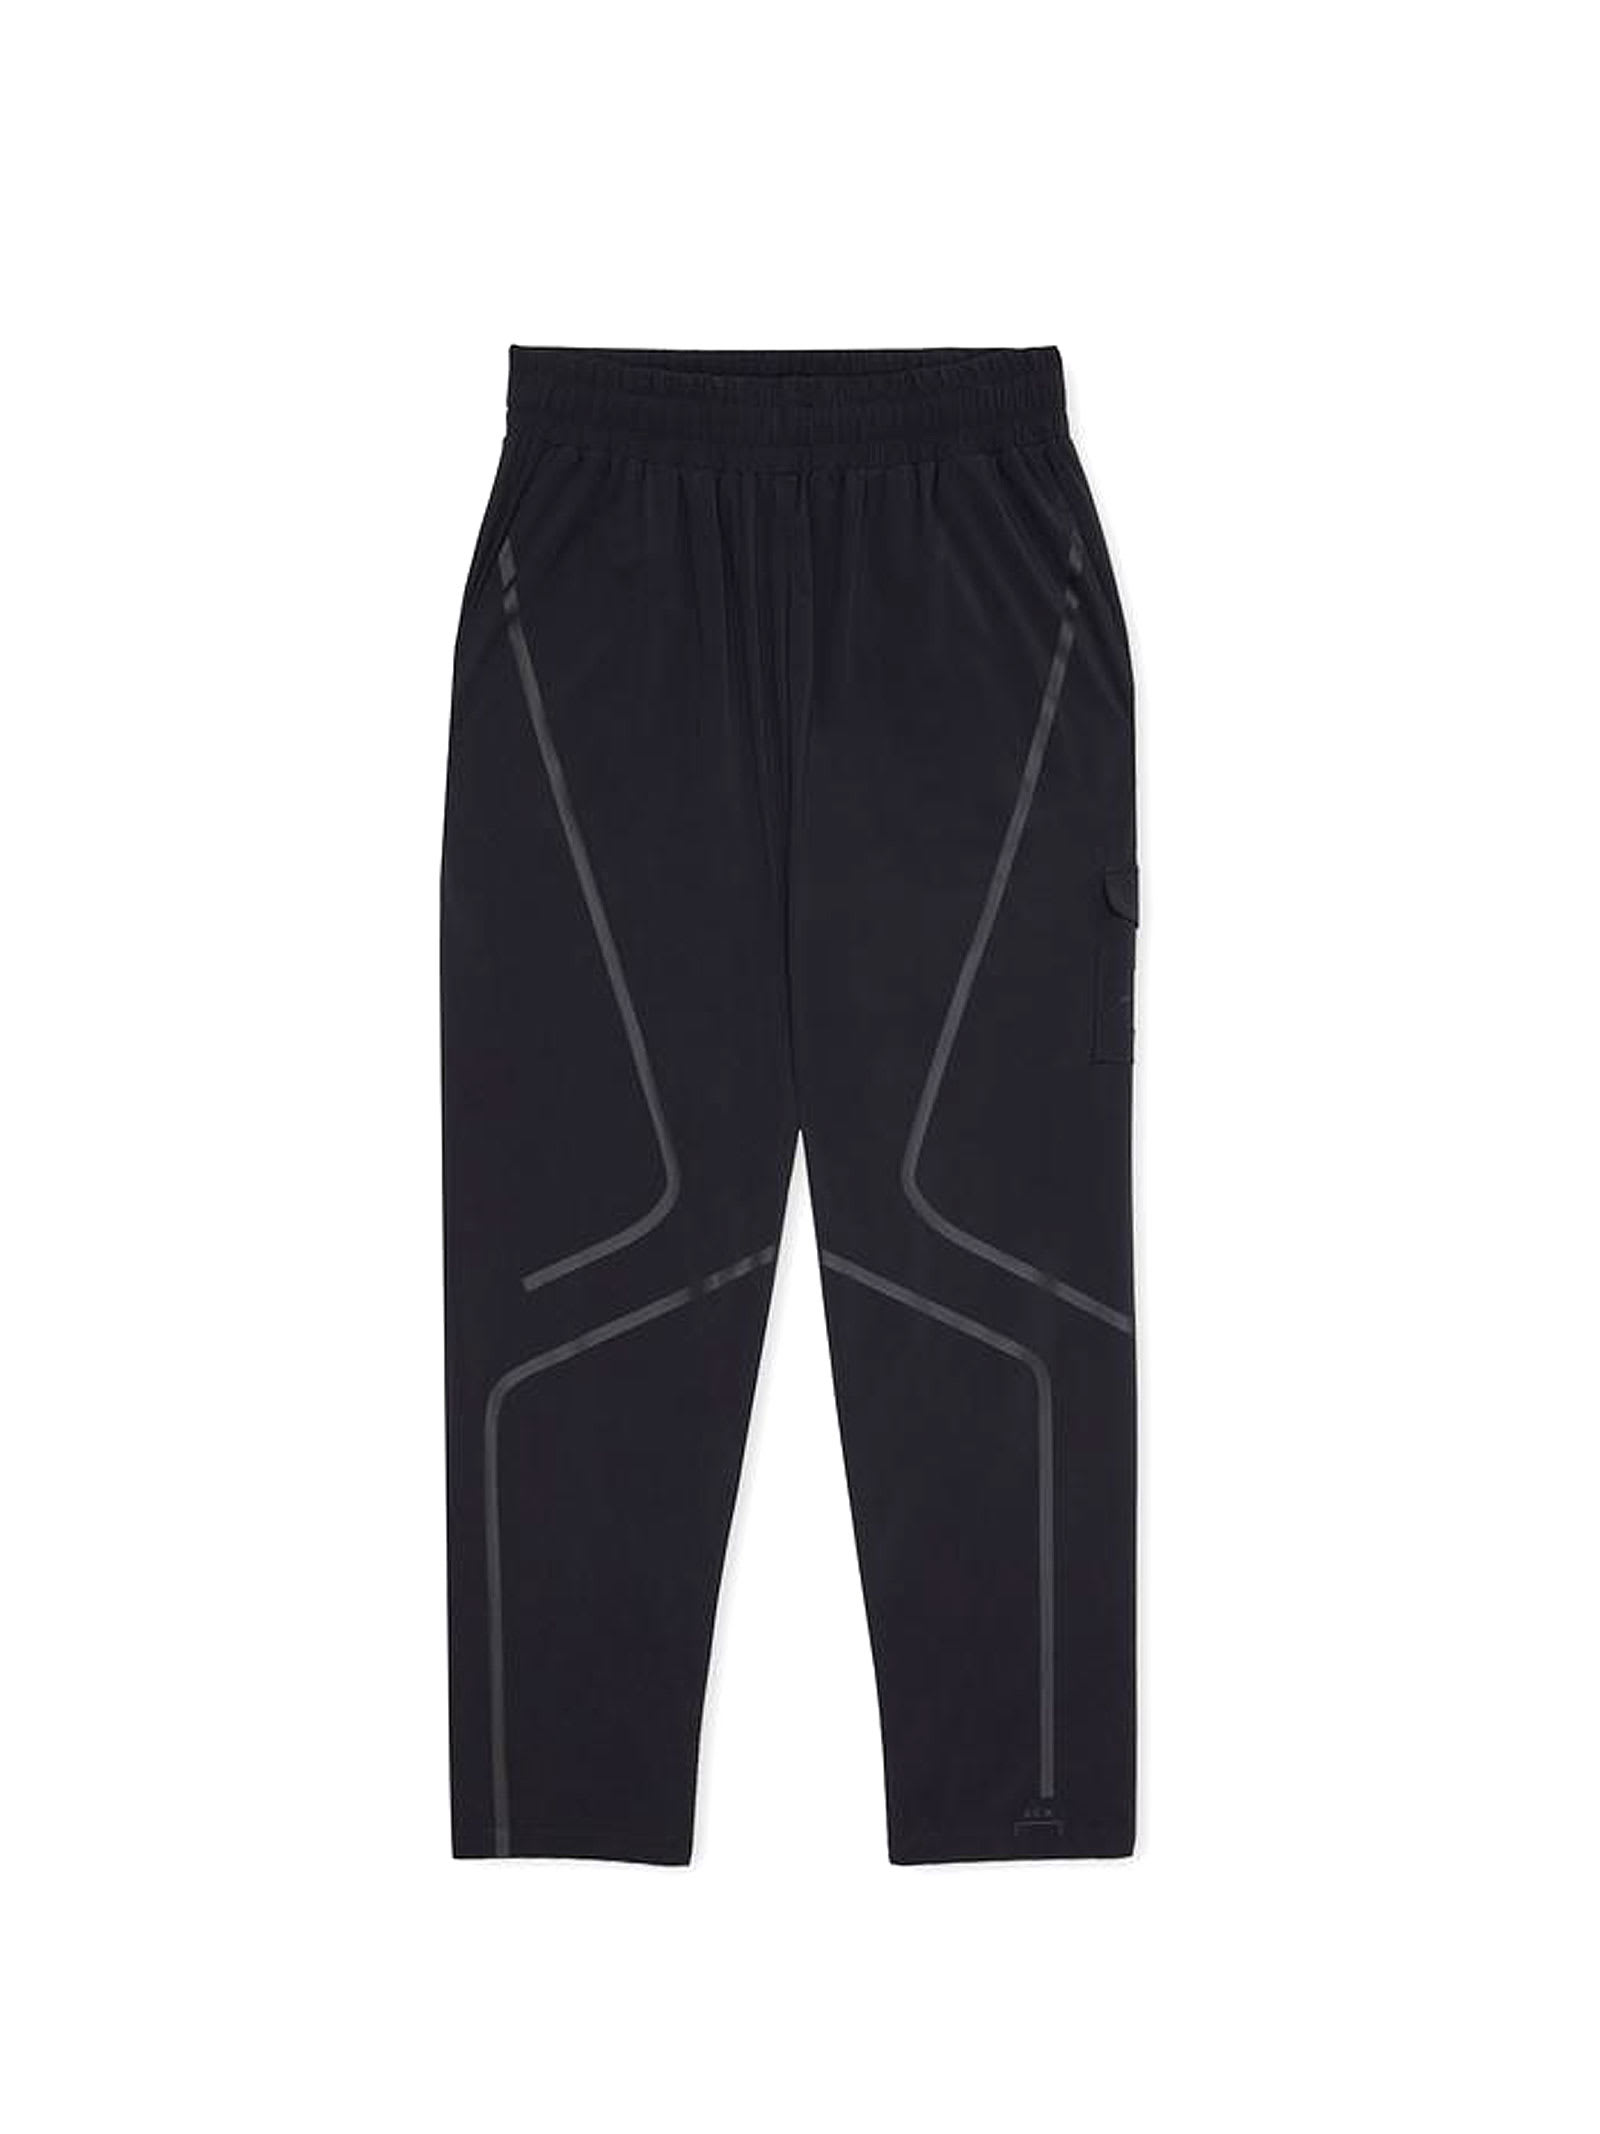 A-COLD-WALL Pants In Black Nylon